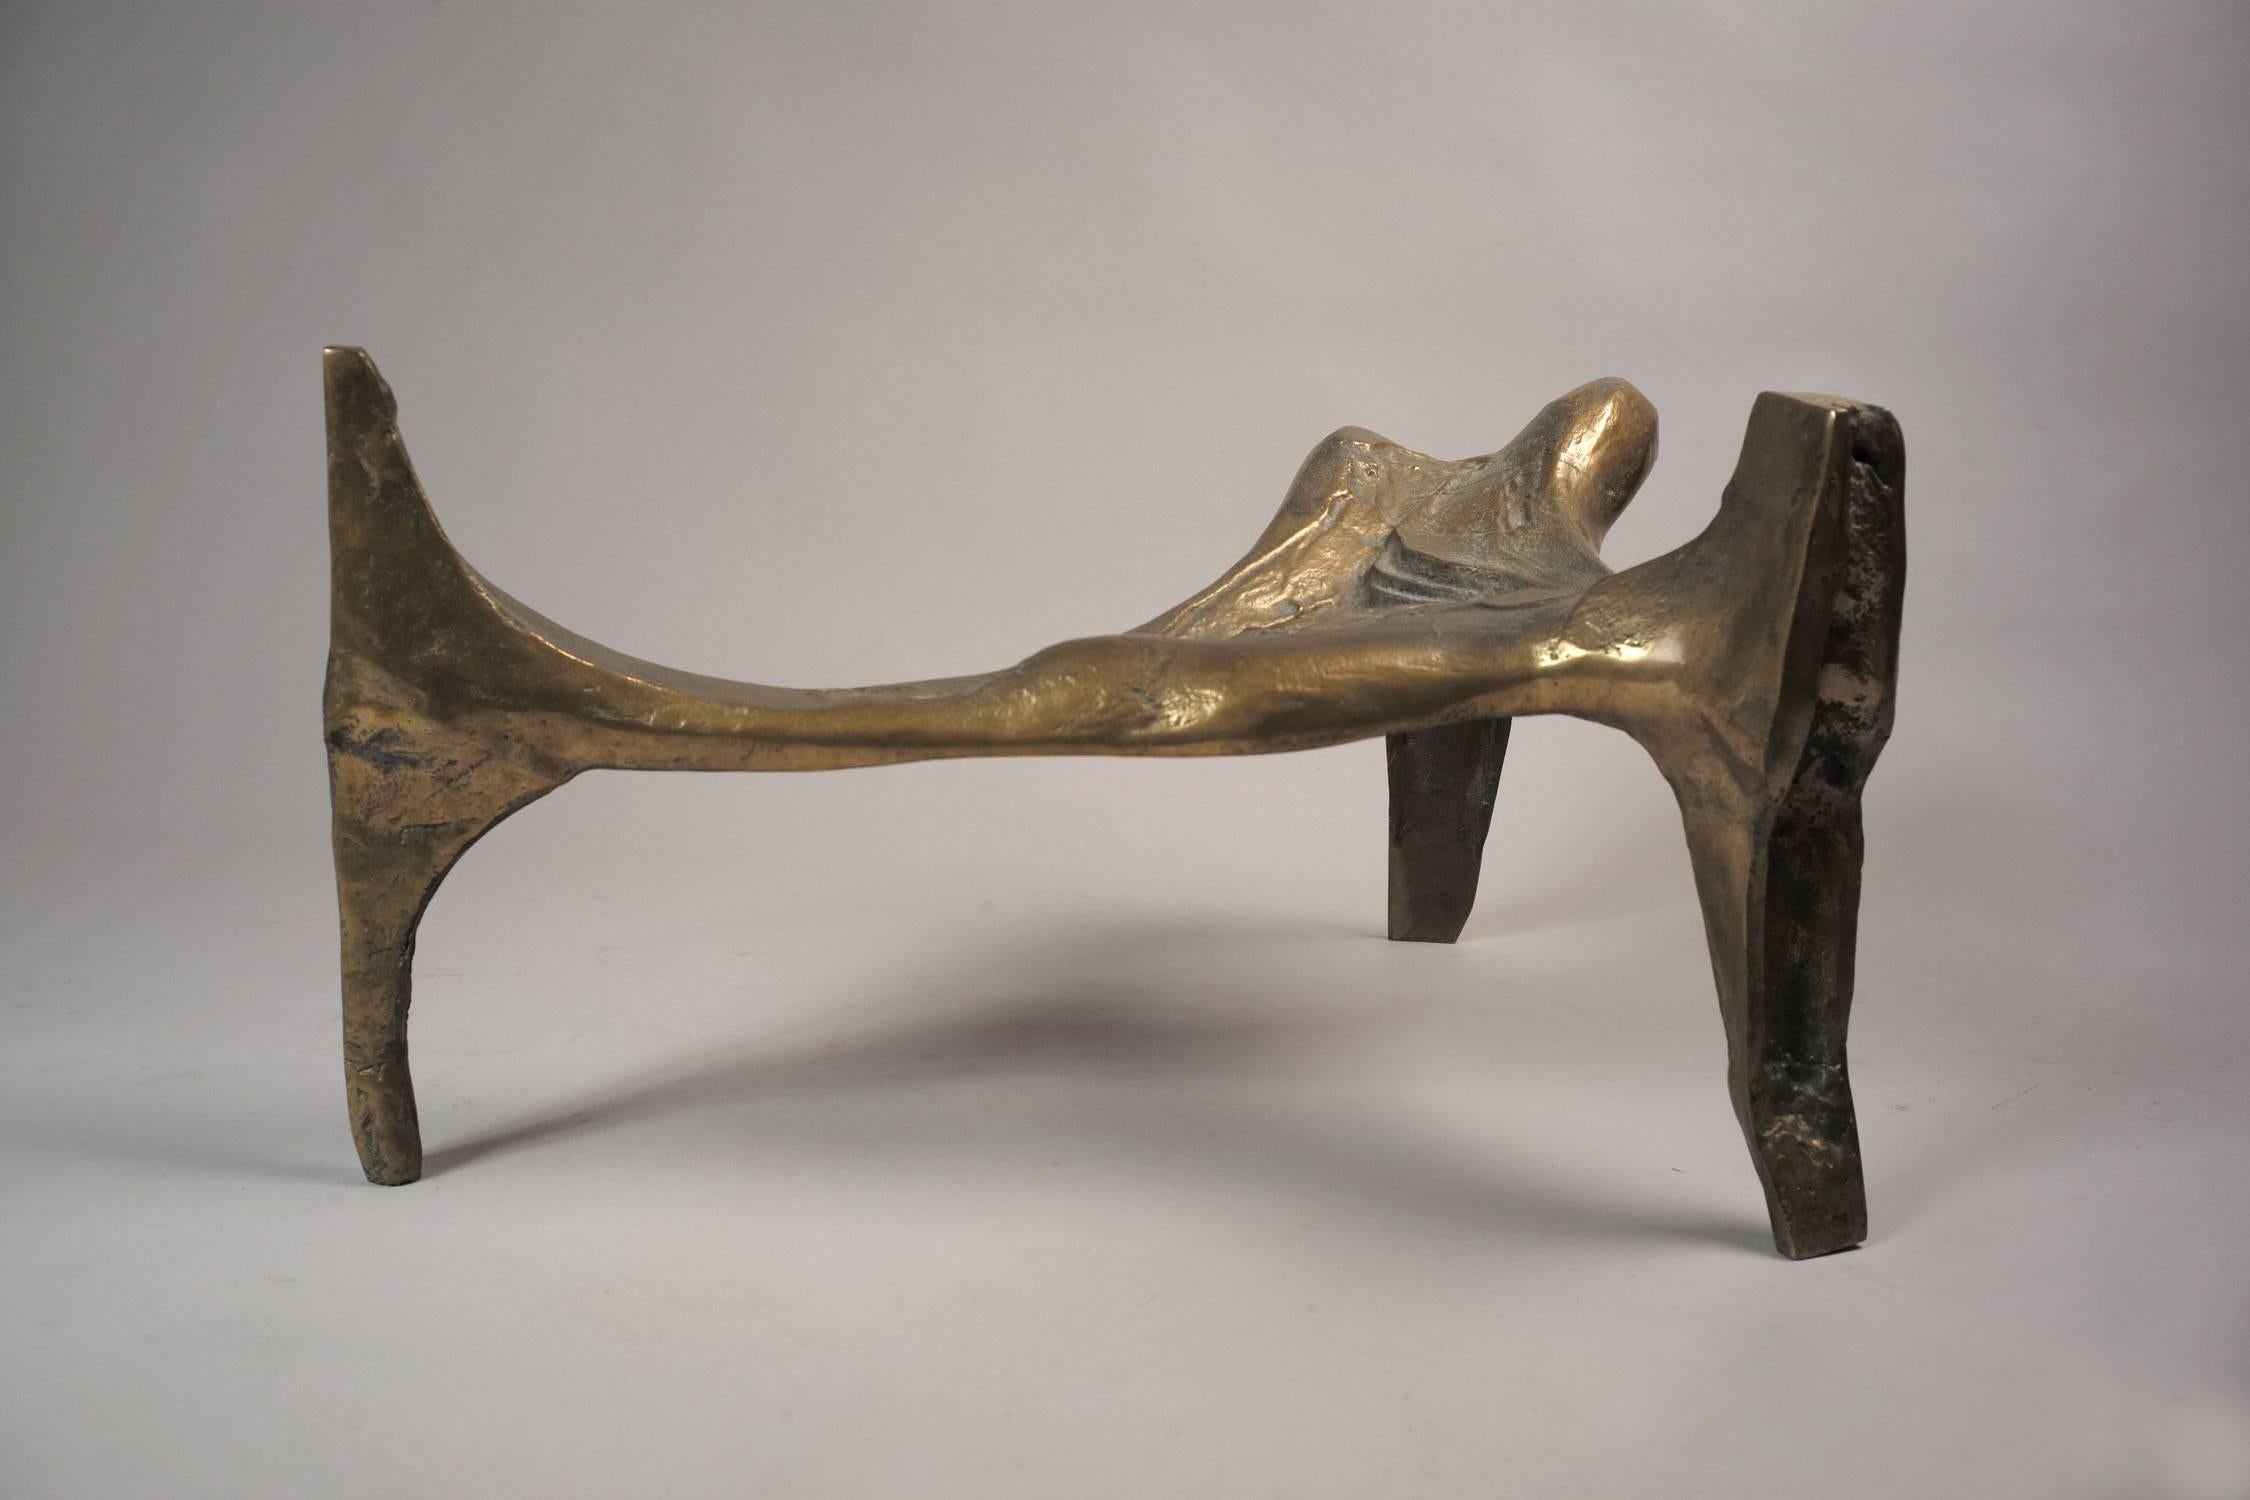 Tripod free form living room table in solid bronze, circa 1960.
In spite of all my researches, this remarkable work of the middle of the twentieth keeps its mystery. This piece, signed and numbered, is to be identified.

